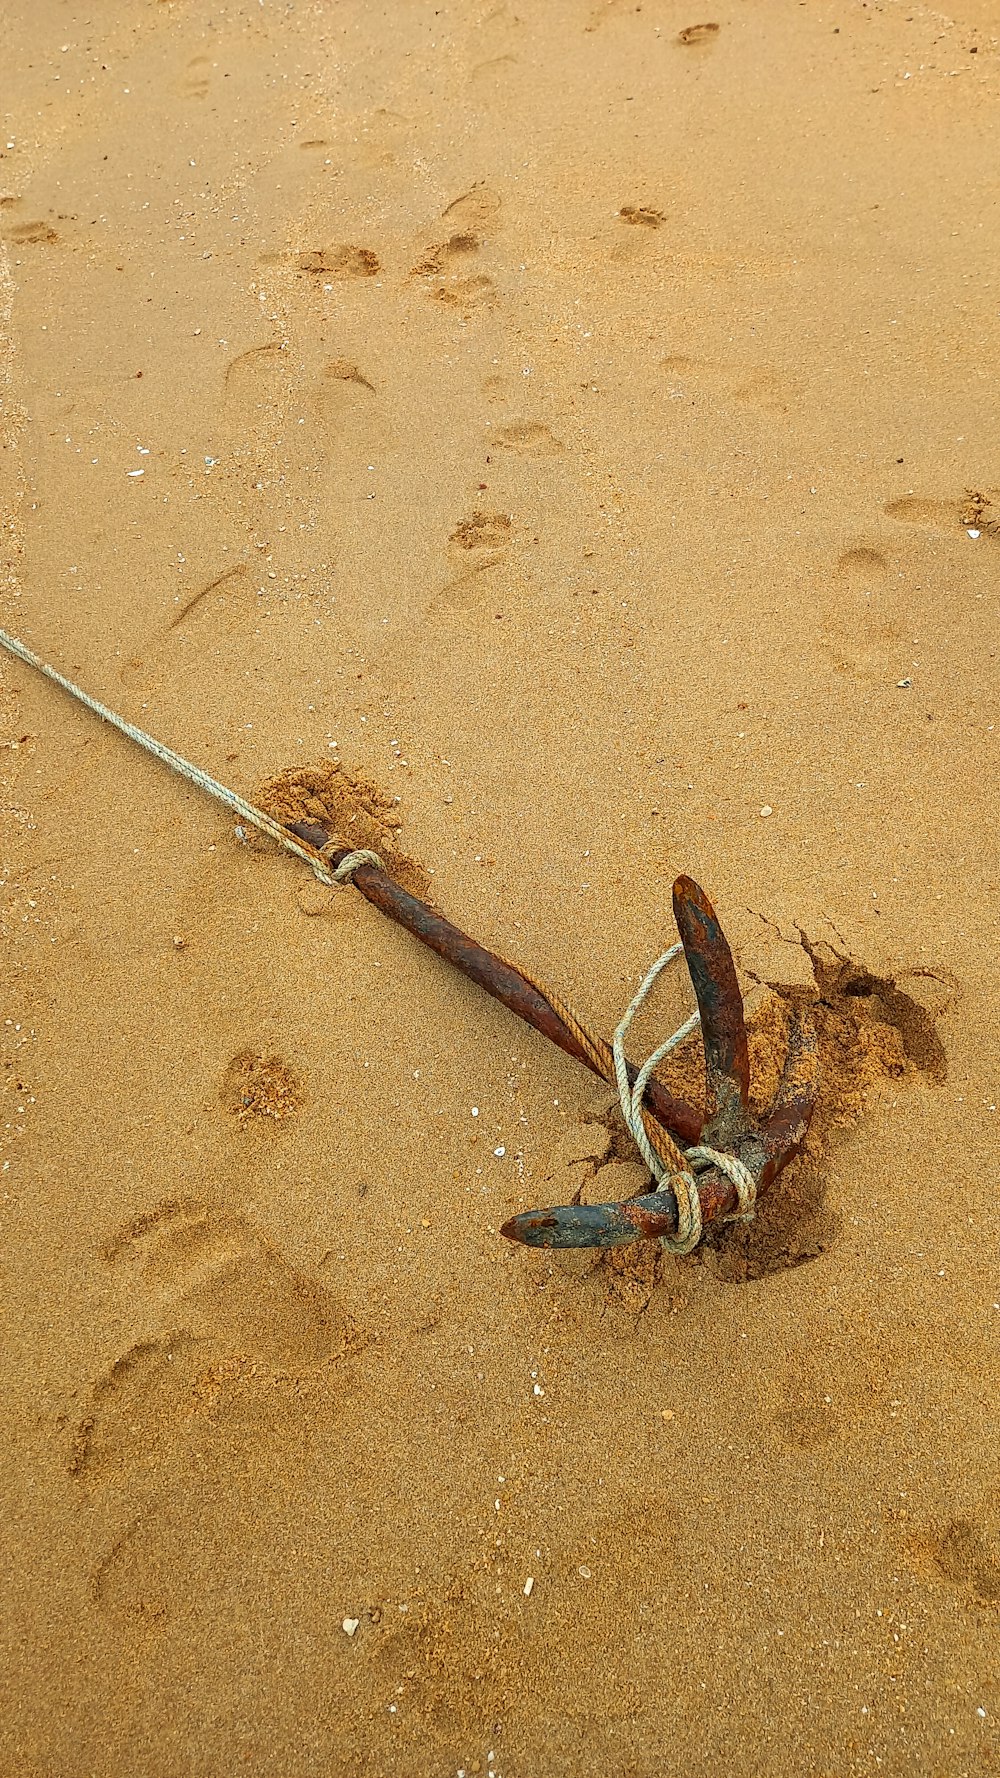 a broken umbrella laying on the sand on the beach